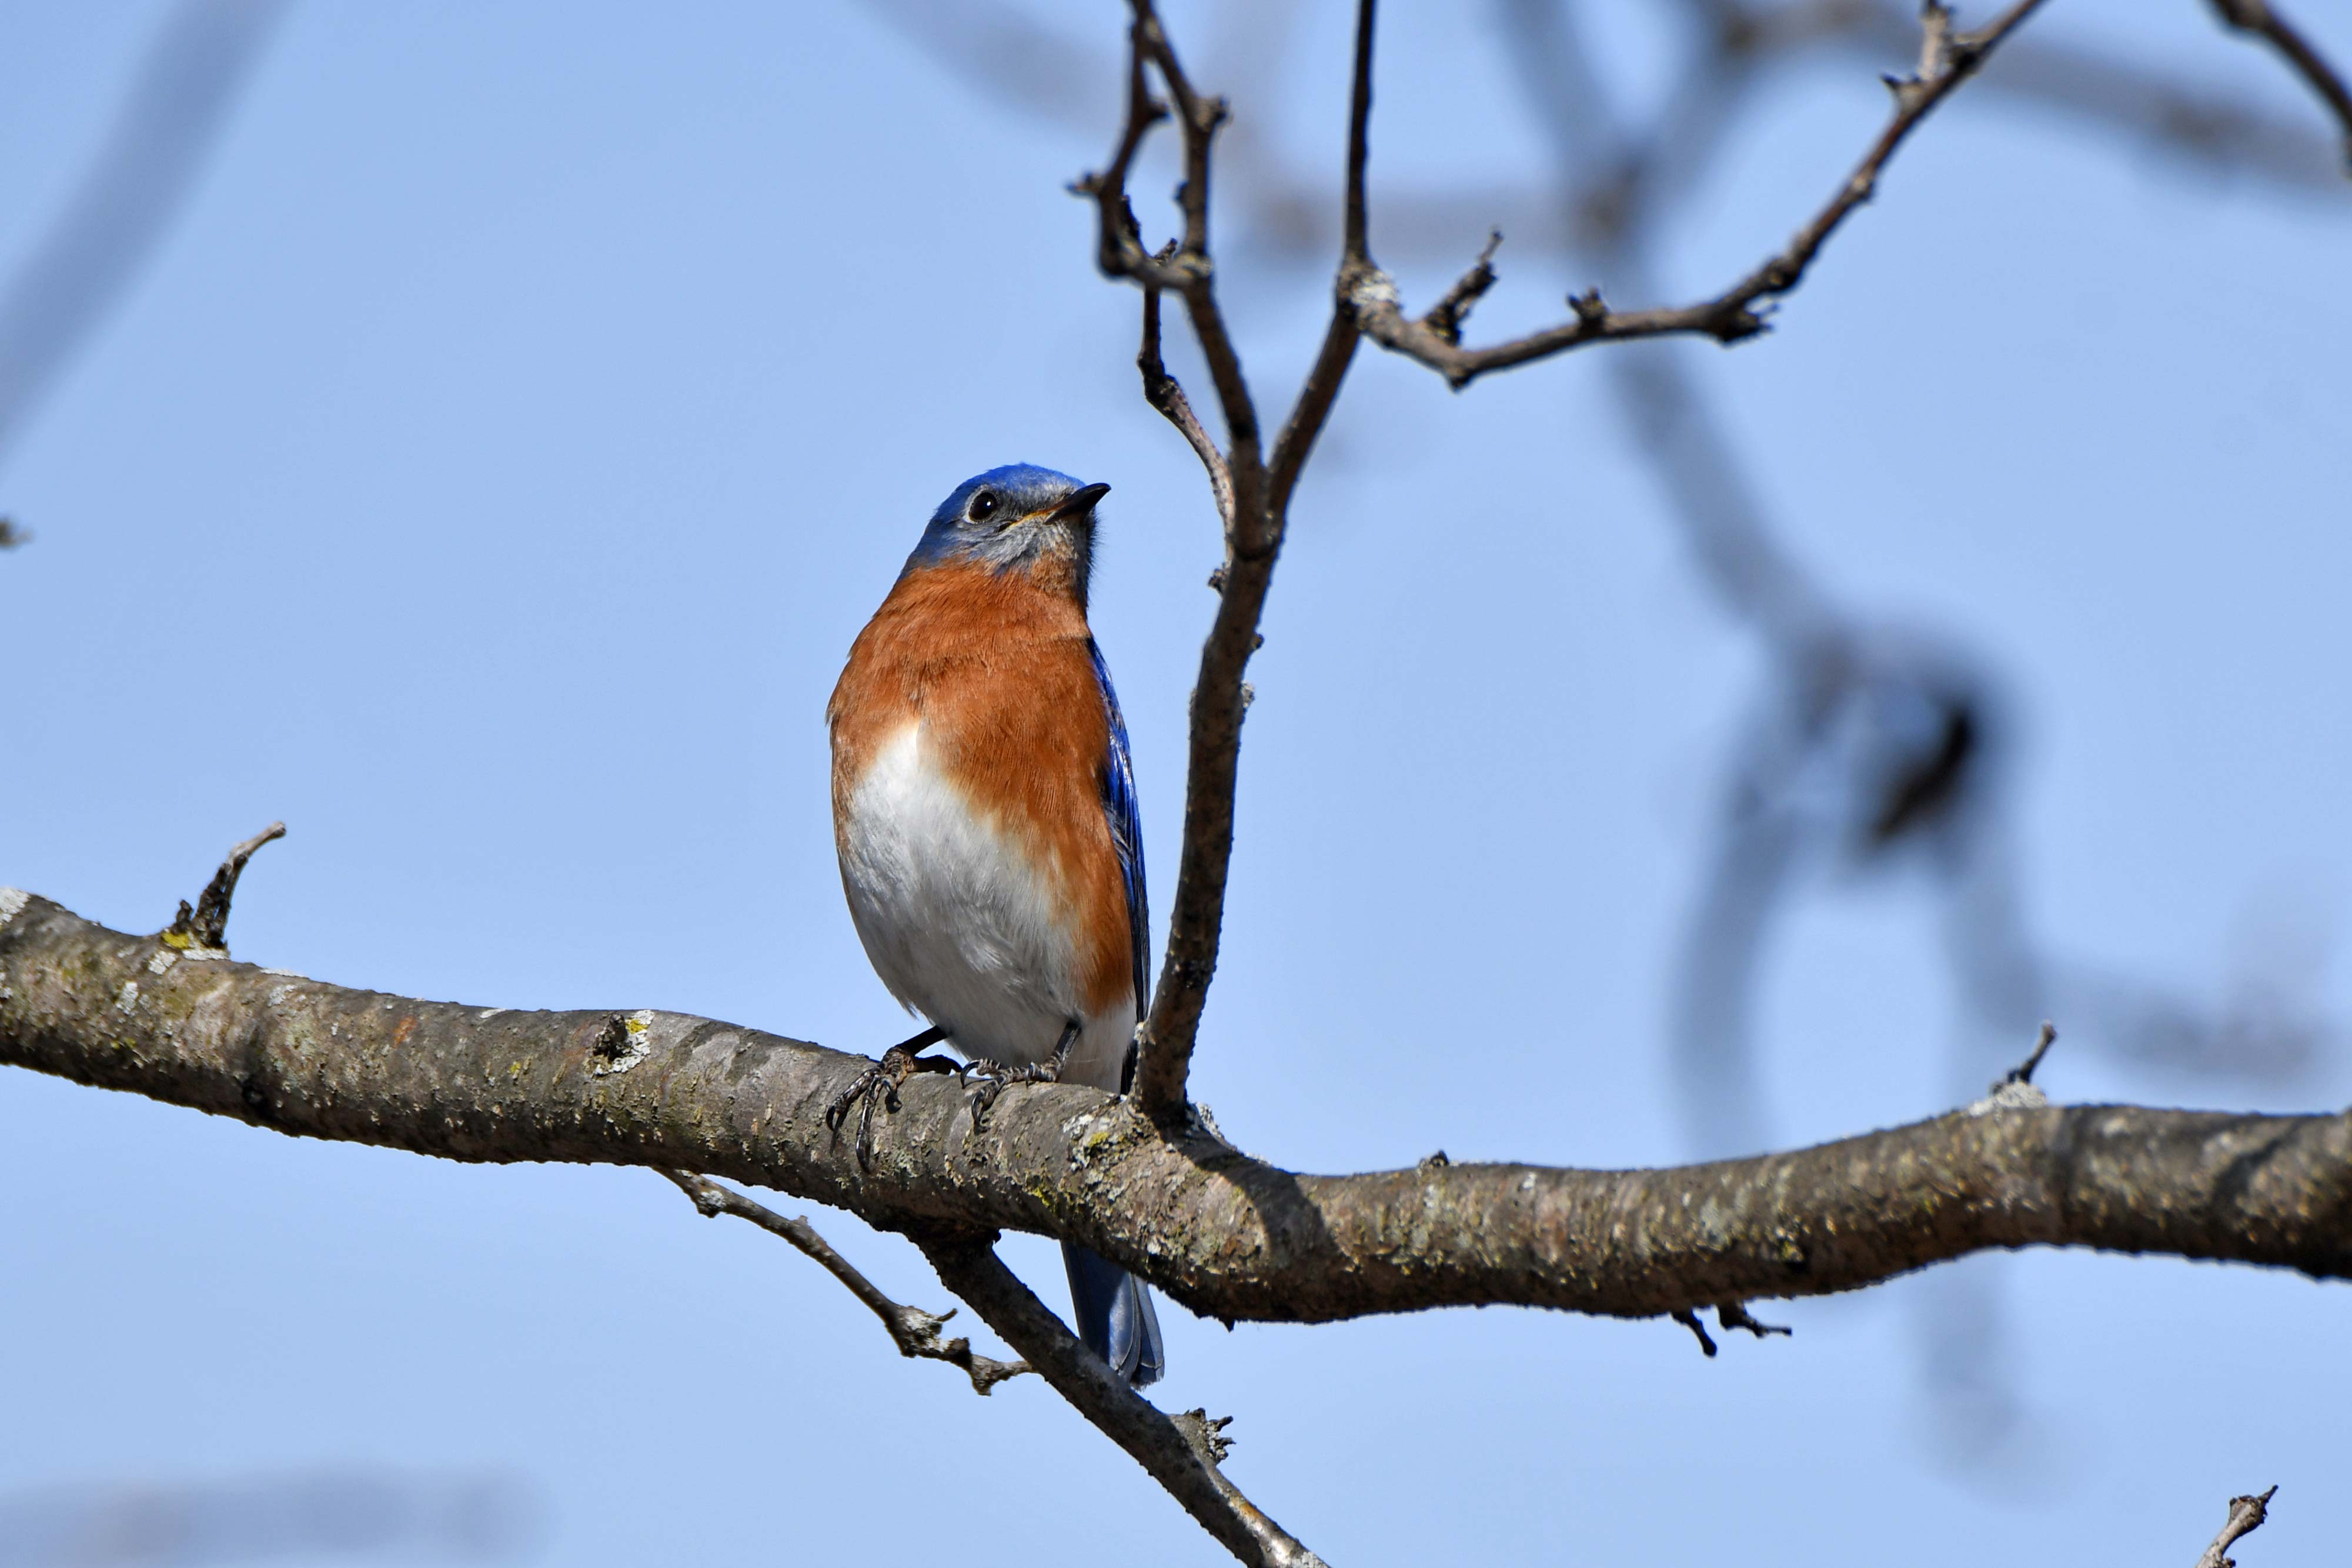 An eastern bluebird perched in a tree